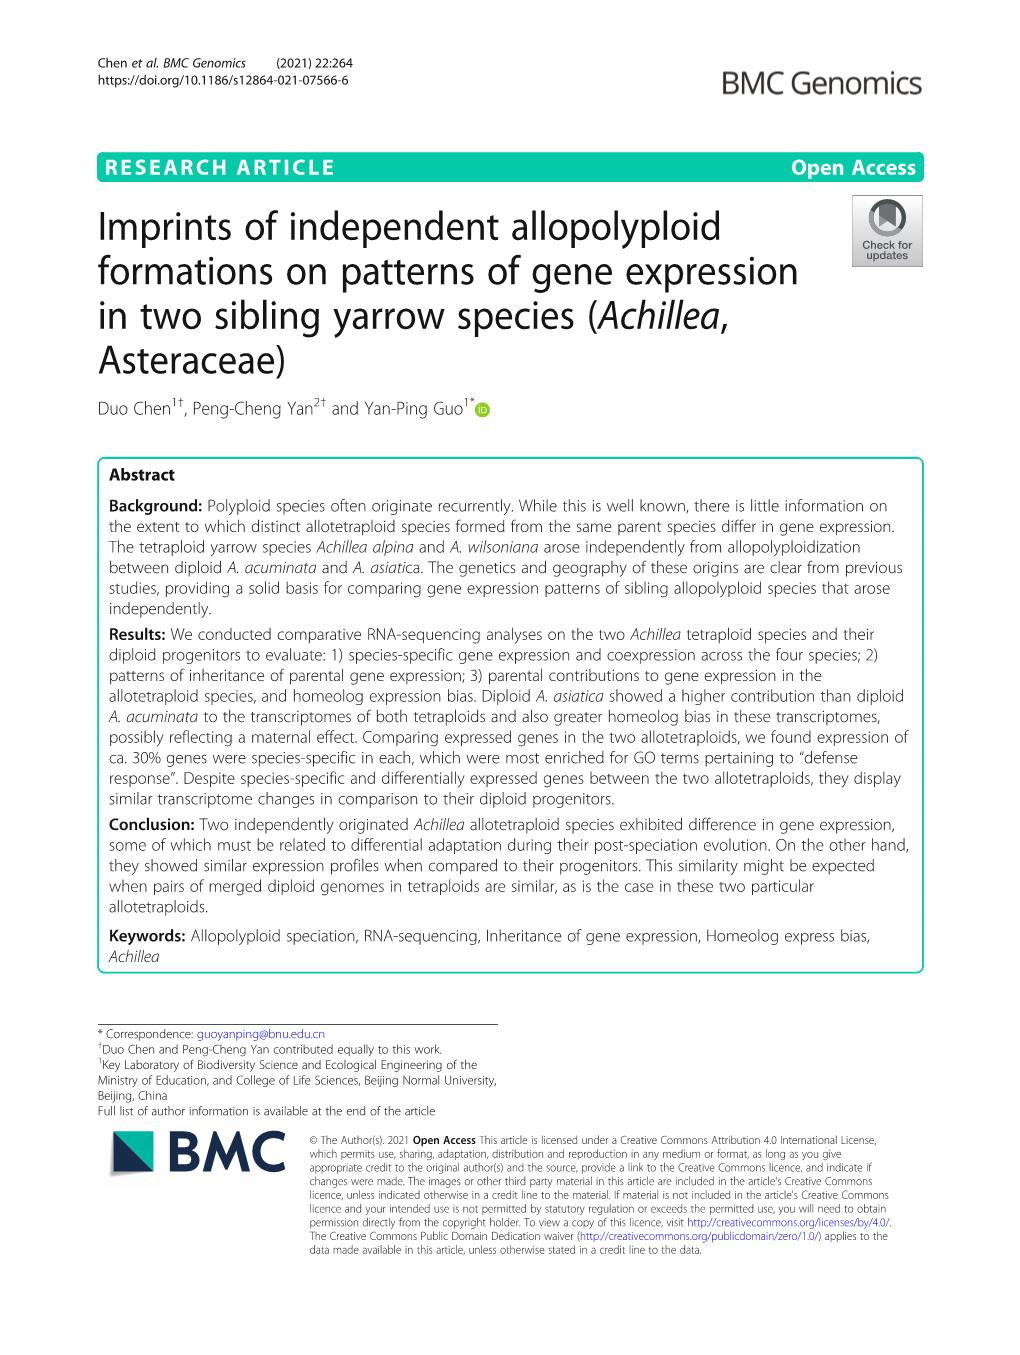 Imprints of Independent Allopolyploid Formations On